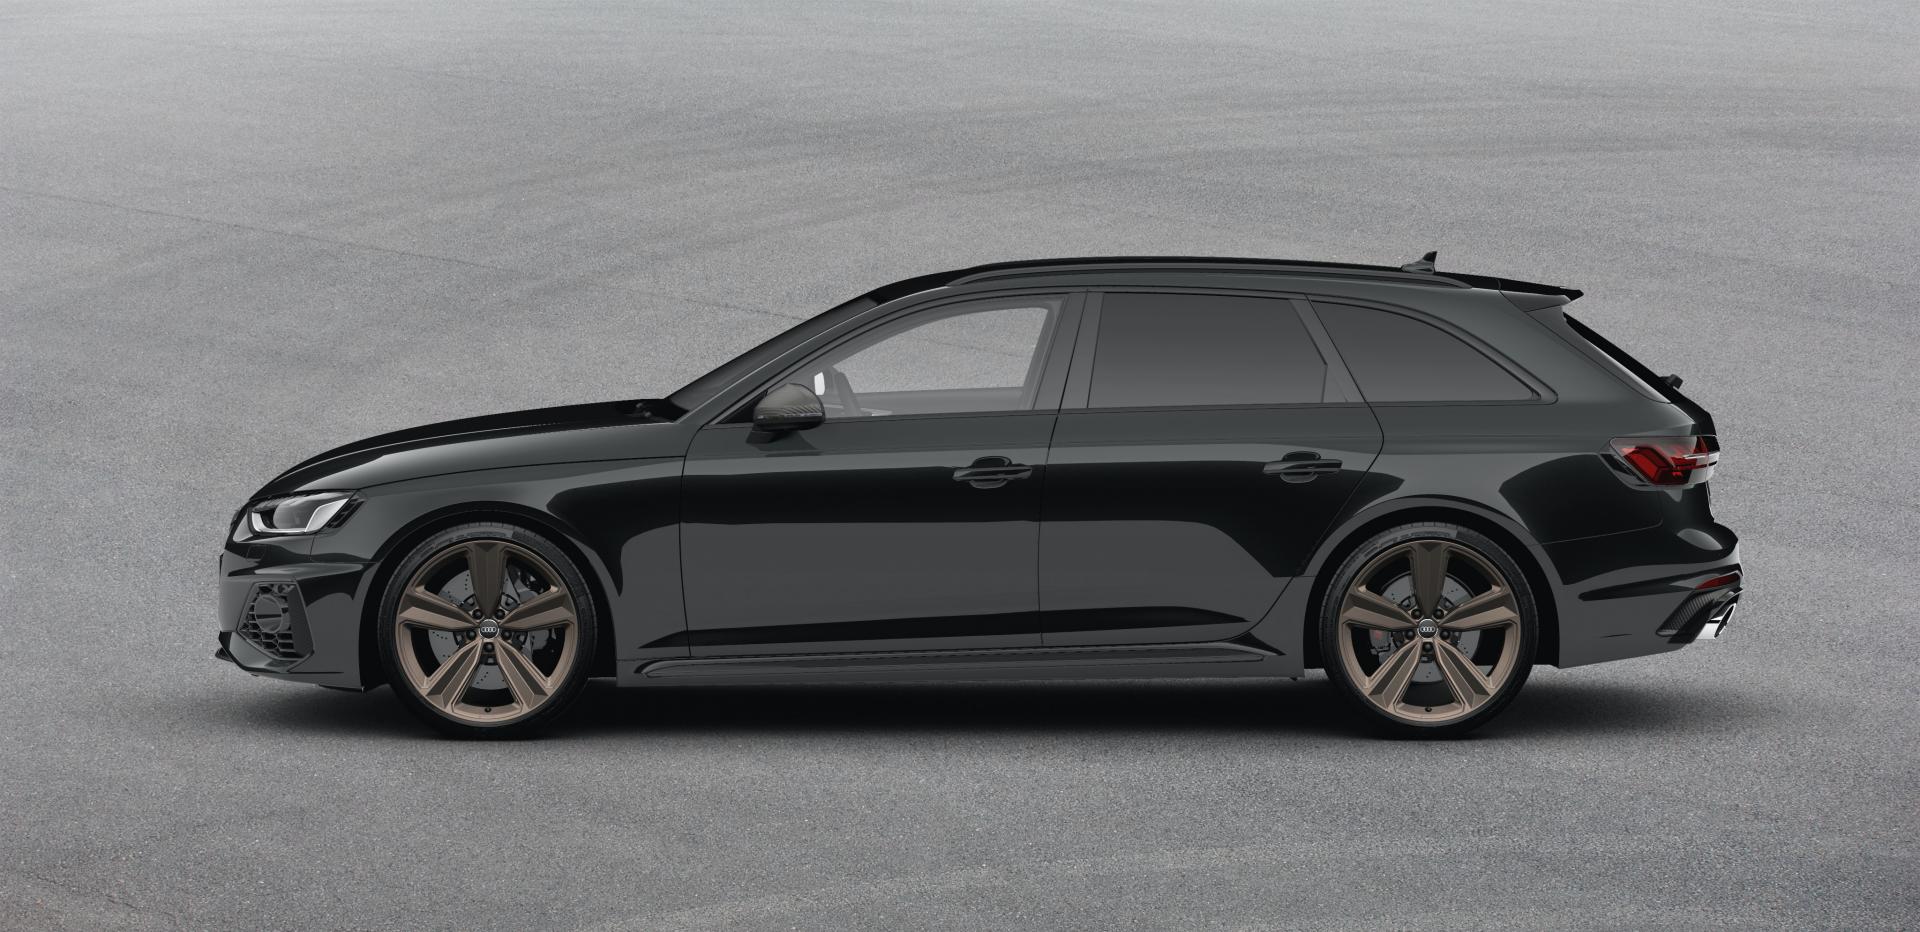 New Limited Run Audi RS4 Avant Bronze Edition Looks Stealthy, Comes